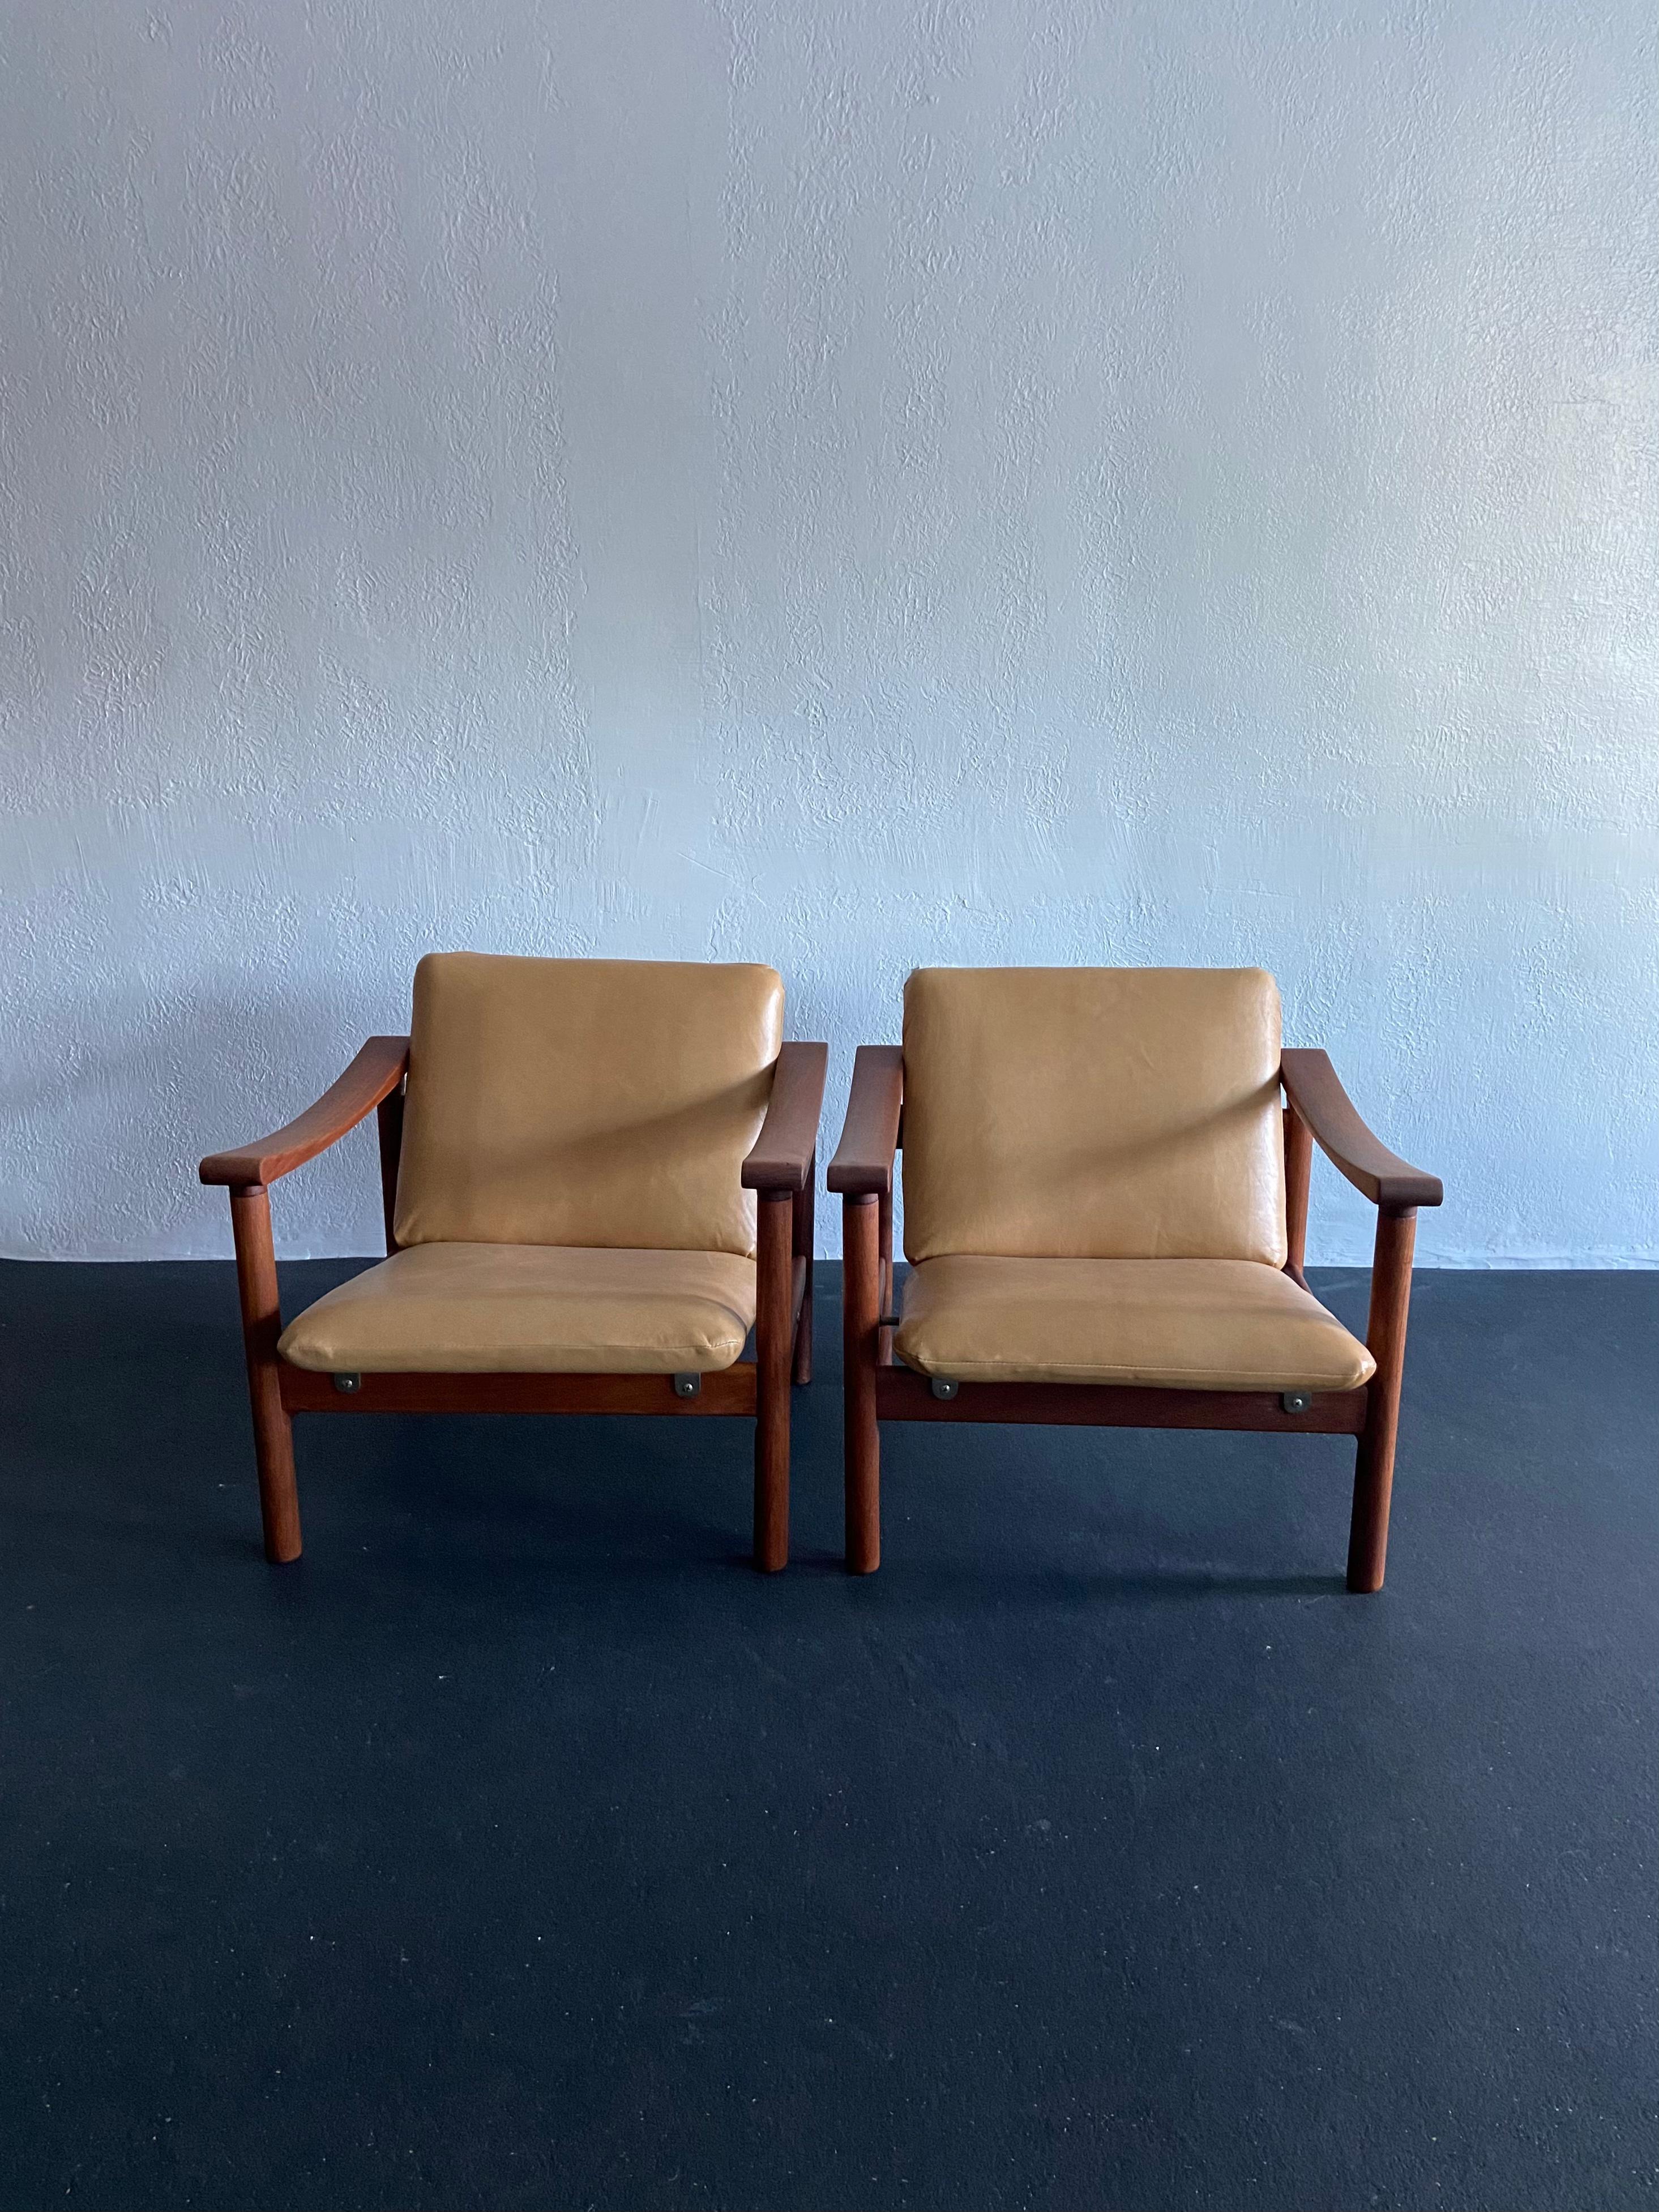 Pair of leather and teak lounge chairs by Hans Wegner for Getama. Model GE-280. Signed. Teak frames have been refinished and the leather upholstery has been updated.

Would work well in a variety of interiors such as modern, mid century modern,